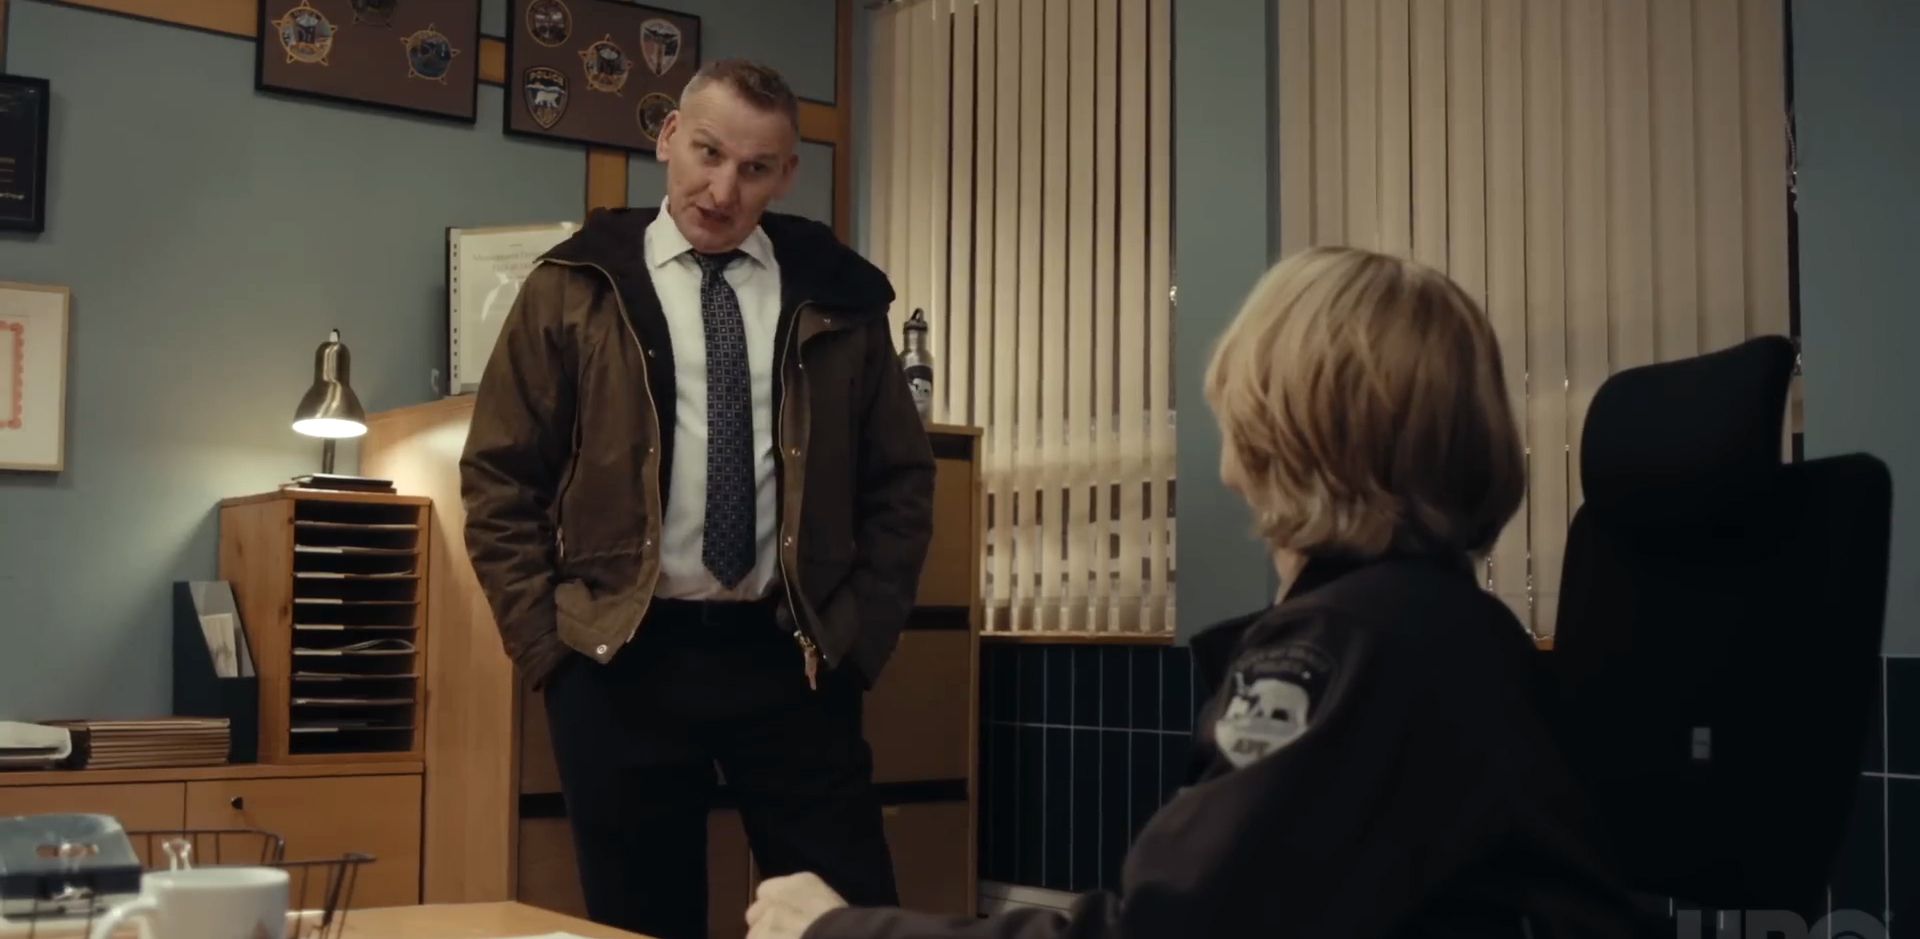 New look at Doctor Who star Christopher Eccleston's True Detective reboot